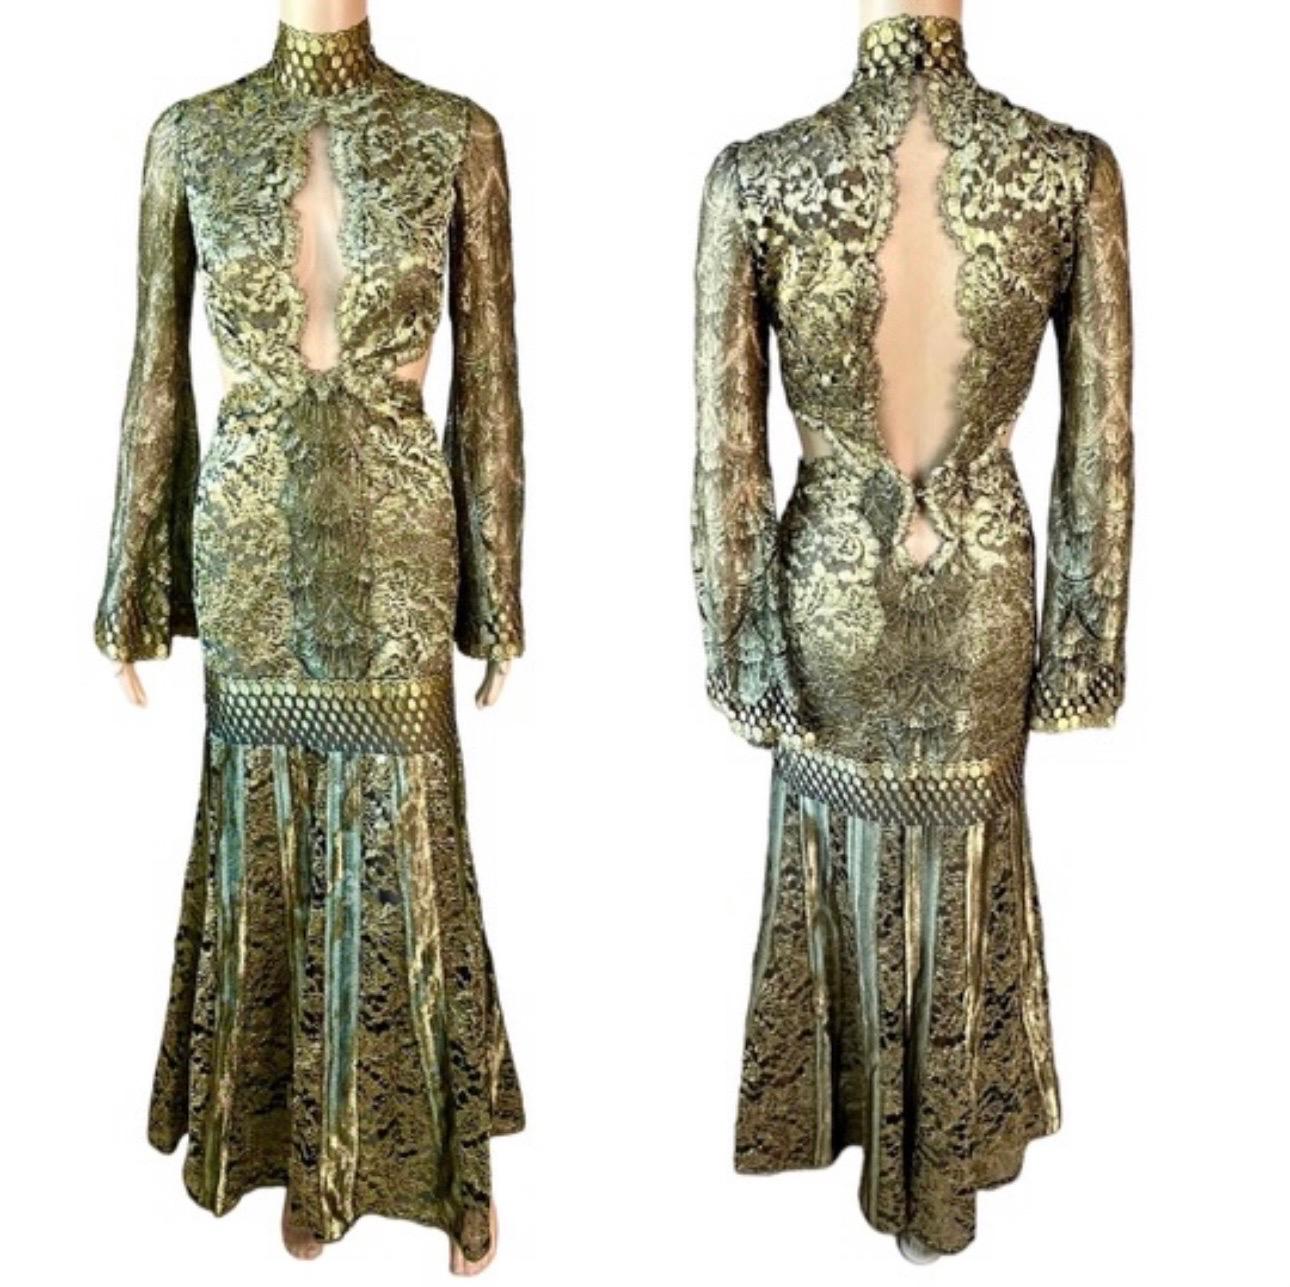 Women's Roberto Cavalli F/W 2016 Runway Gold Sheer Lace Evening Dress Gown For Sale